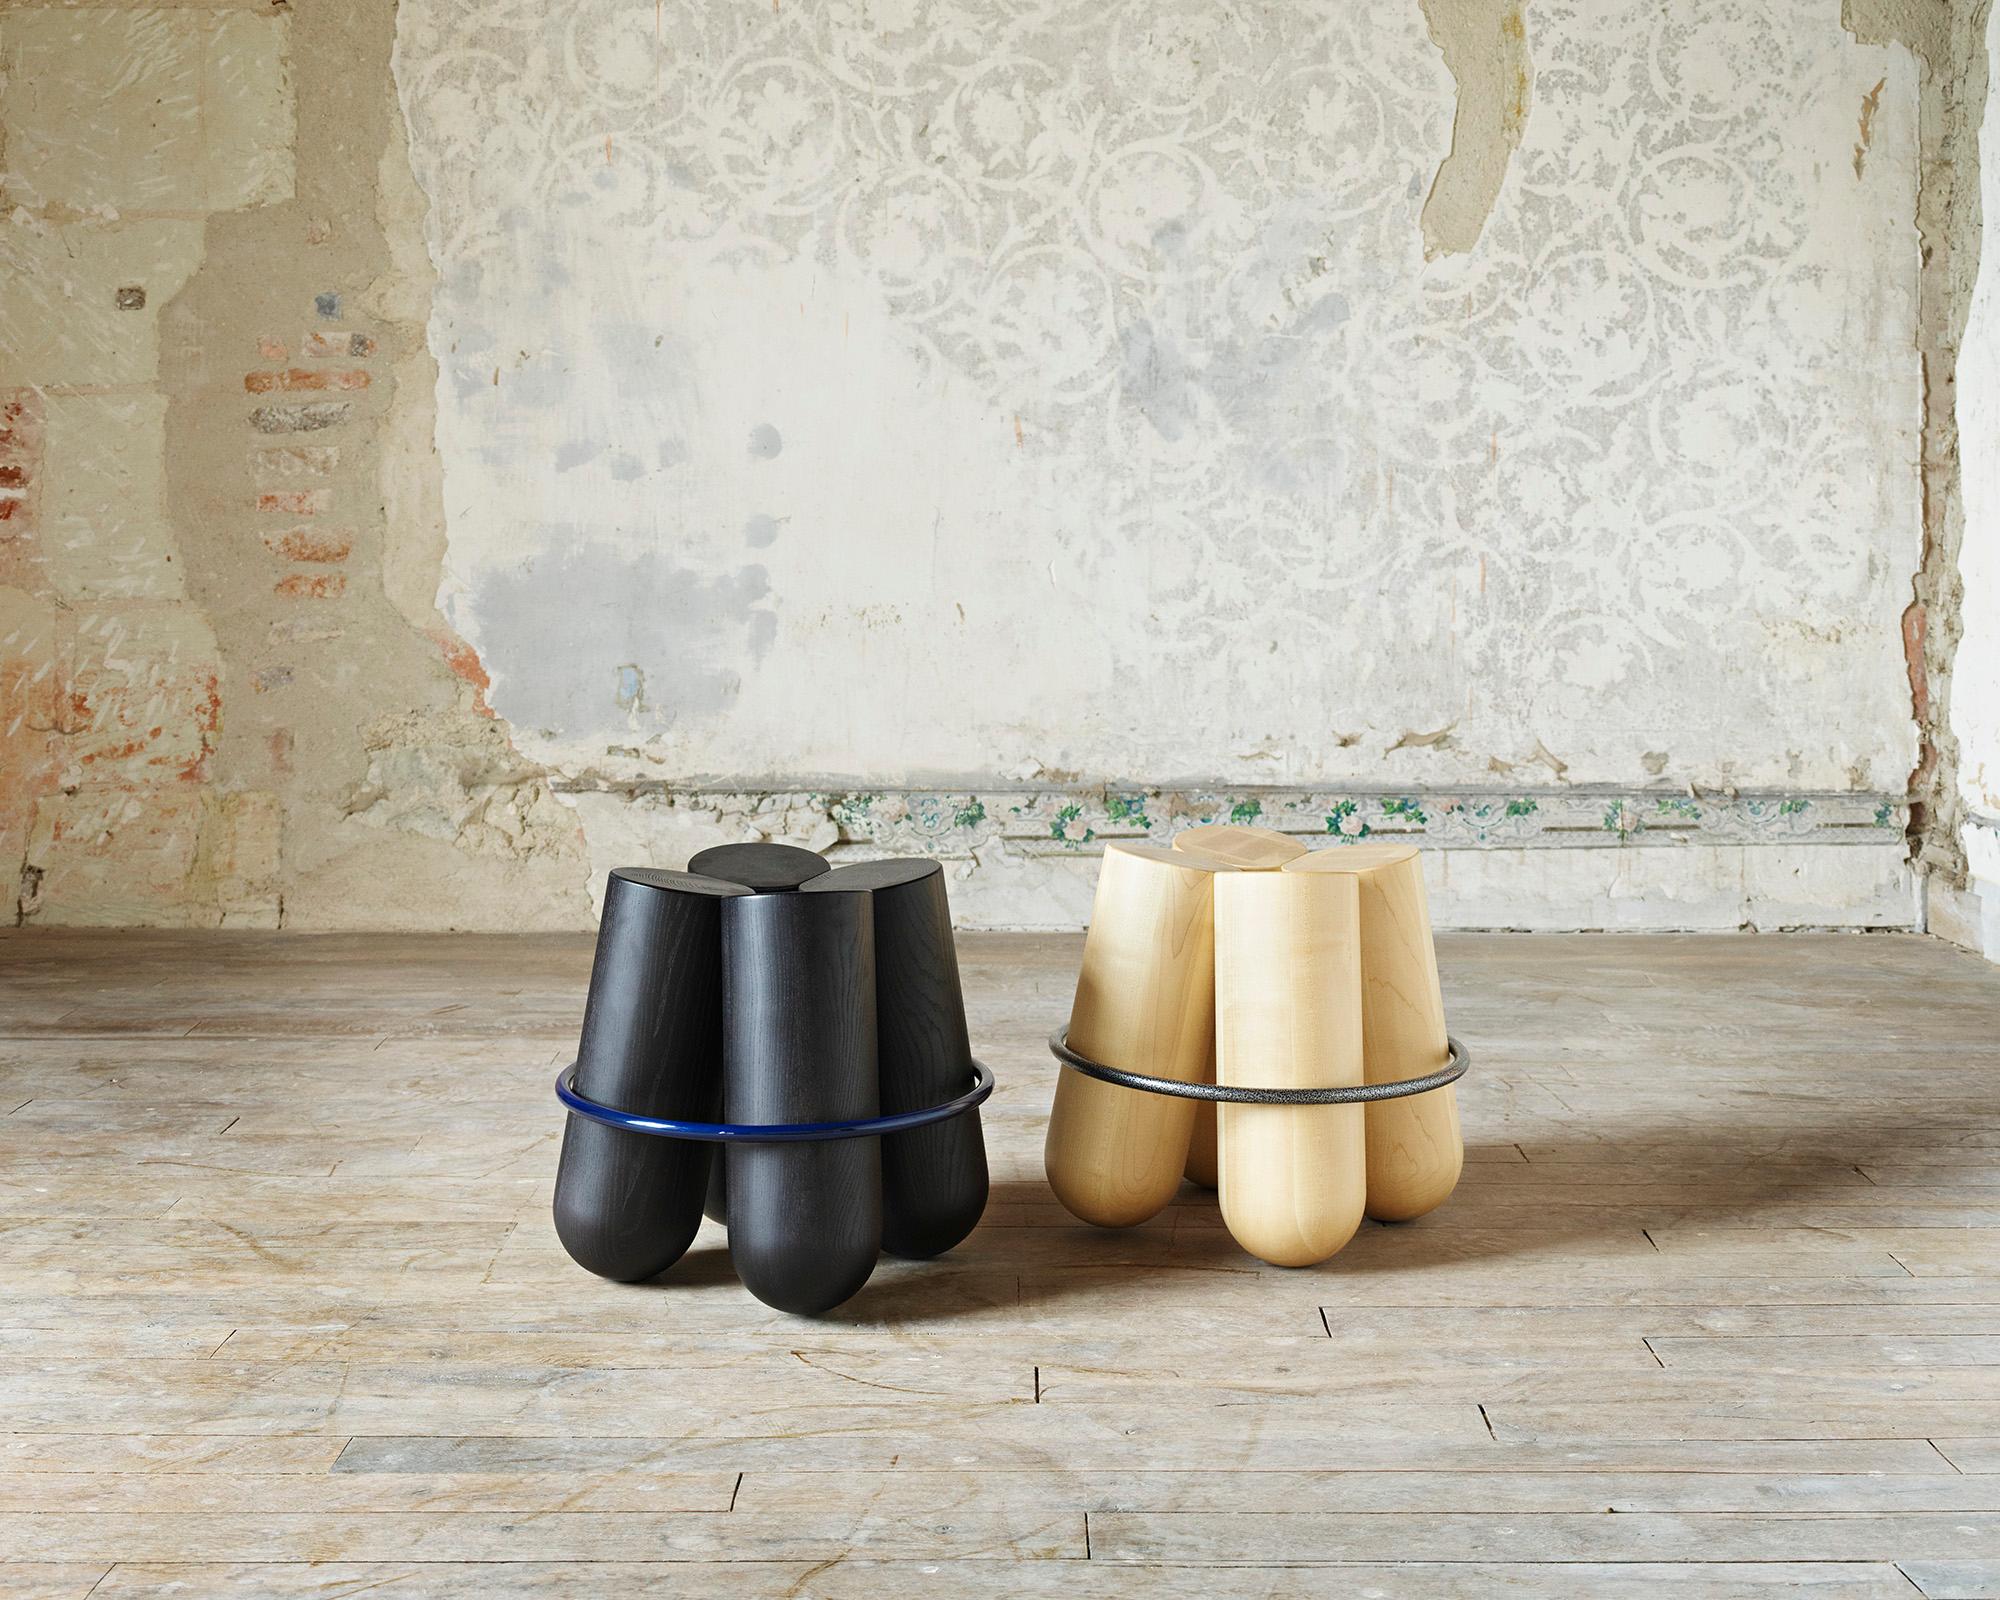 Bolt is a stool with a simple construction, four cylinders of solid wood are held together by a metal ring. The result is both a modern and statuesque object that will surprise with its unexpected comfort.

Won the wallpaper design awards